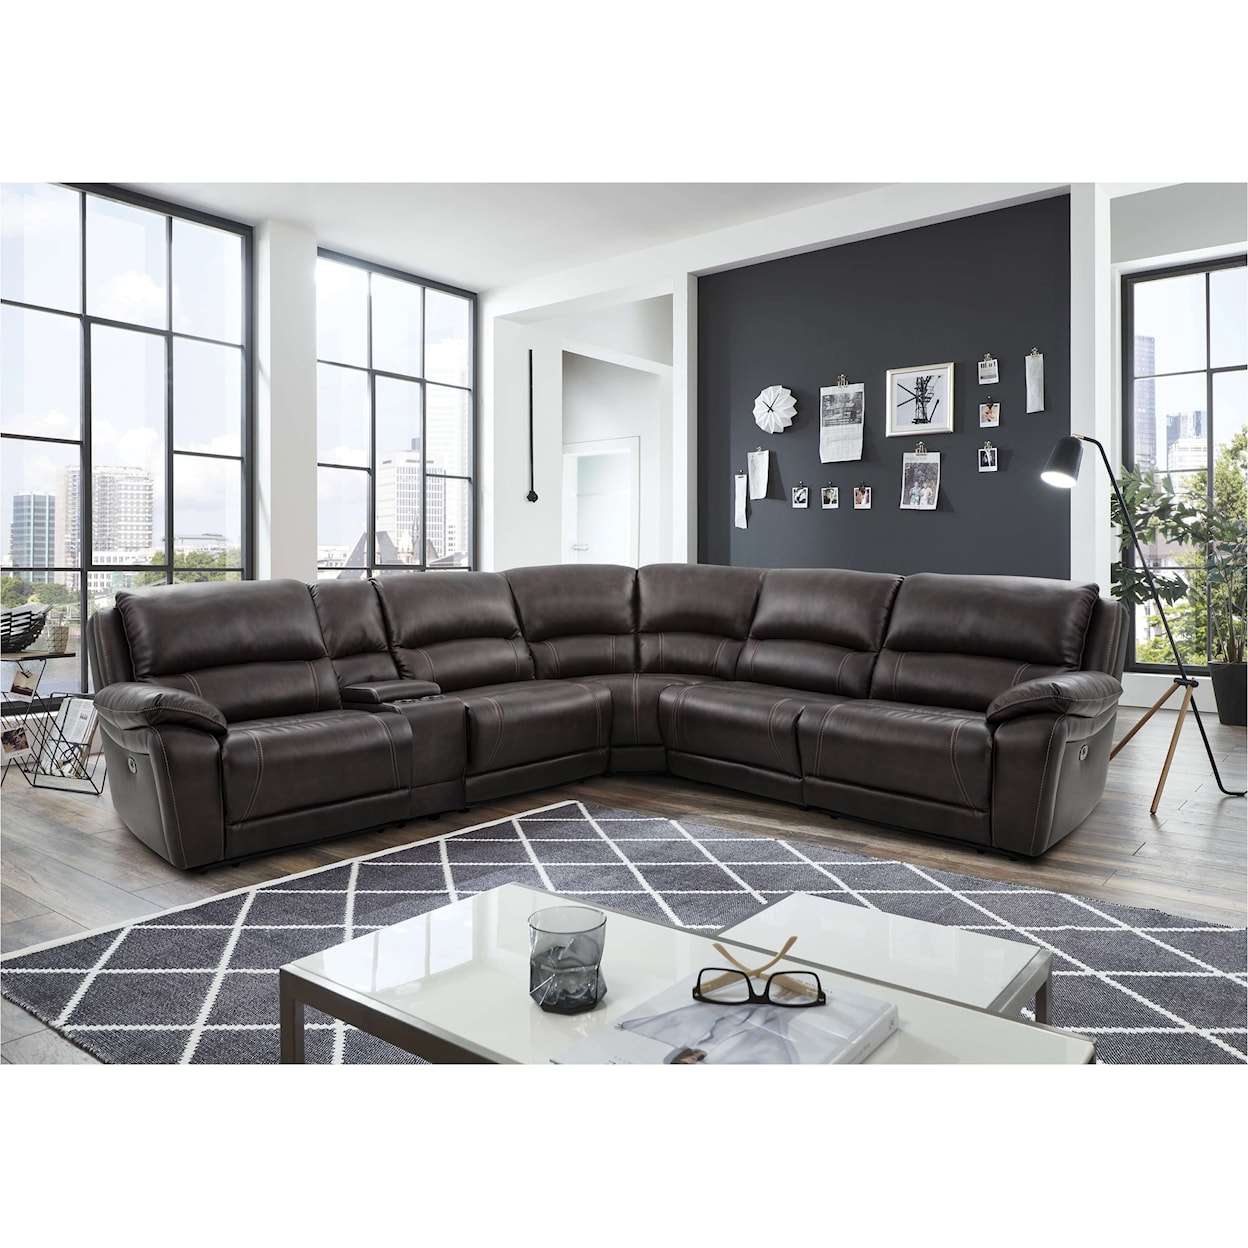 8532 UXW8532 6 Piece Power Reclining Sectional | American Furniture ...